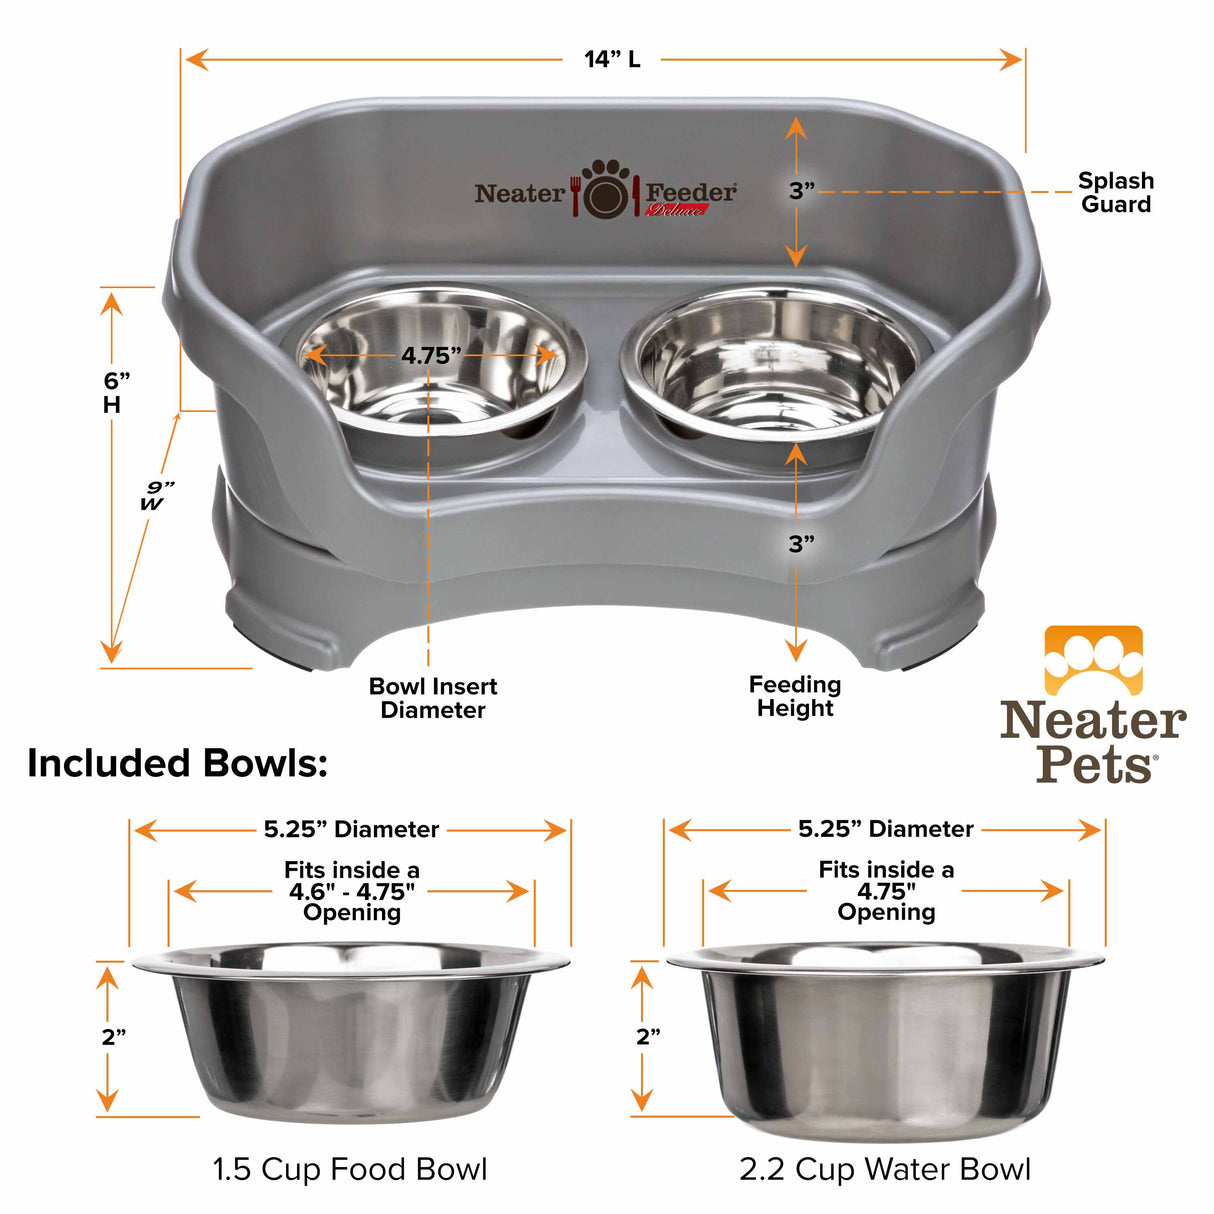 Deluxe Gunmetal Grey Small Neater Feeder and Bowl dimensions